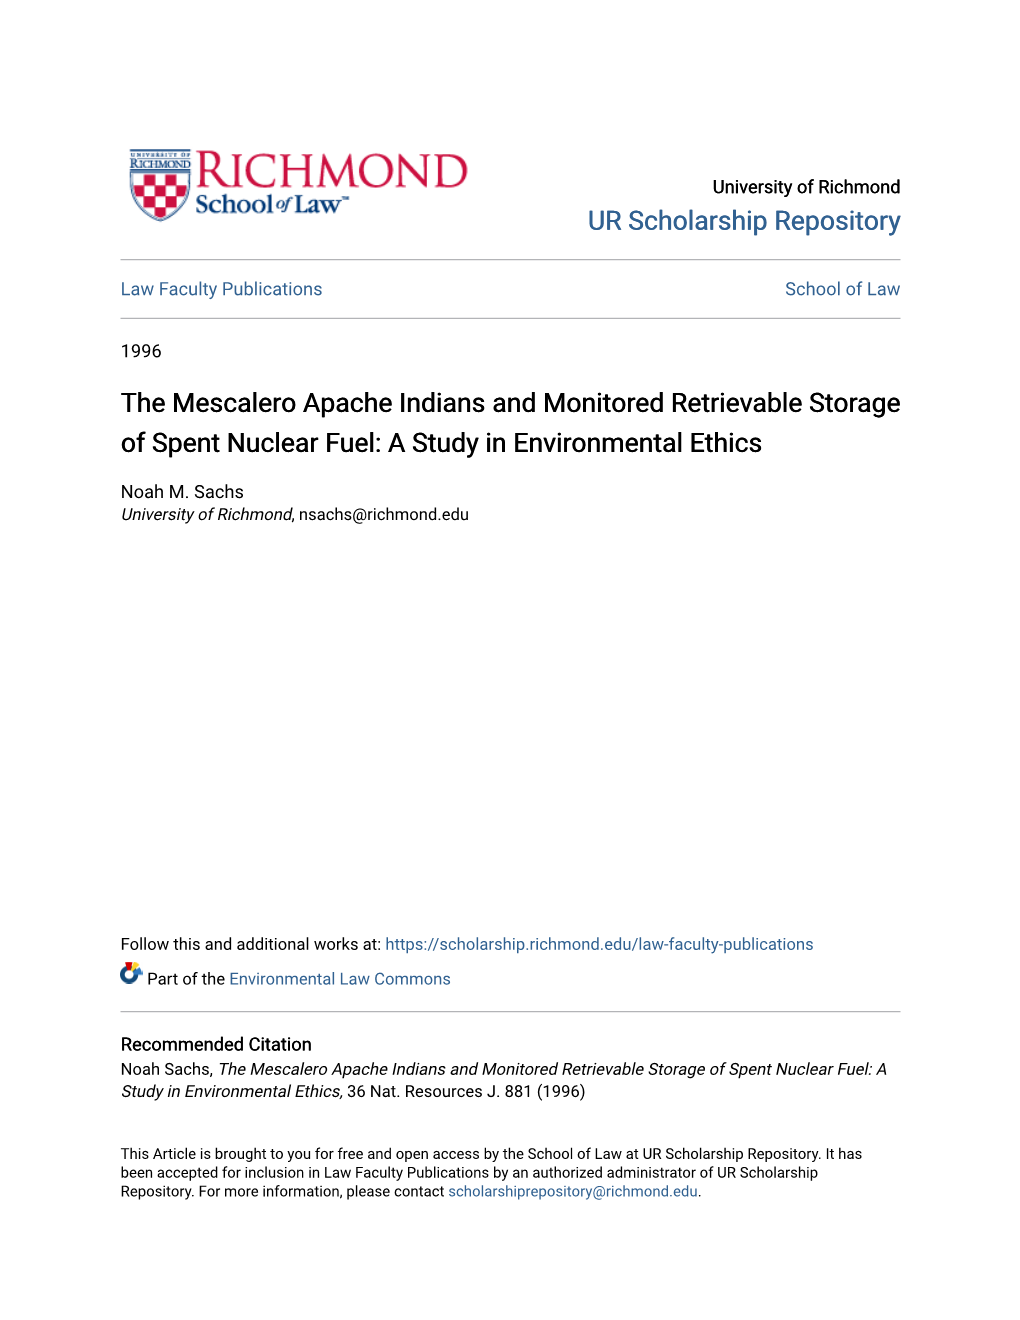 The Mescalero Apache Indians and Monitored Retrievable Storage of Spent Nuclear Fuel: a Study in Environmental Ethics